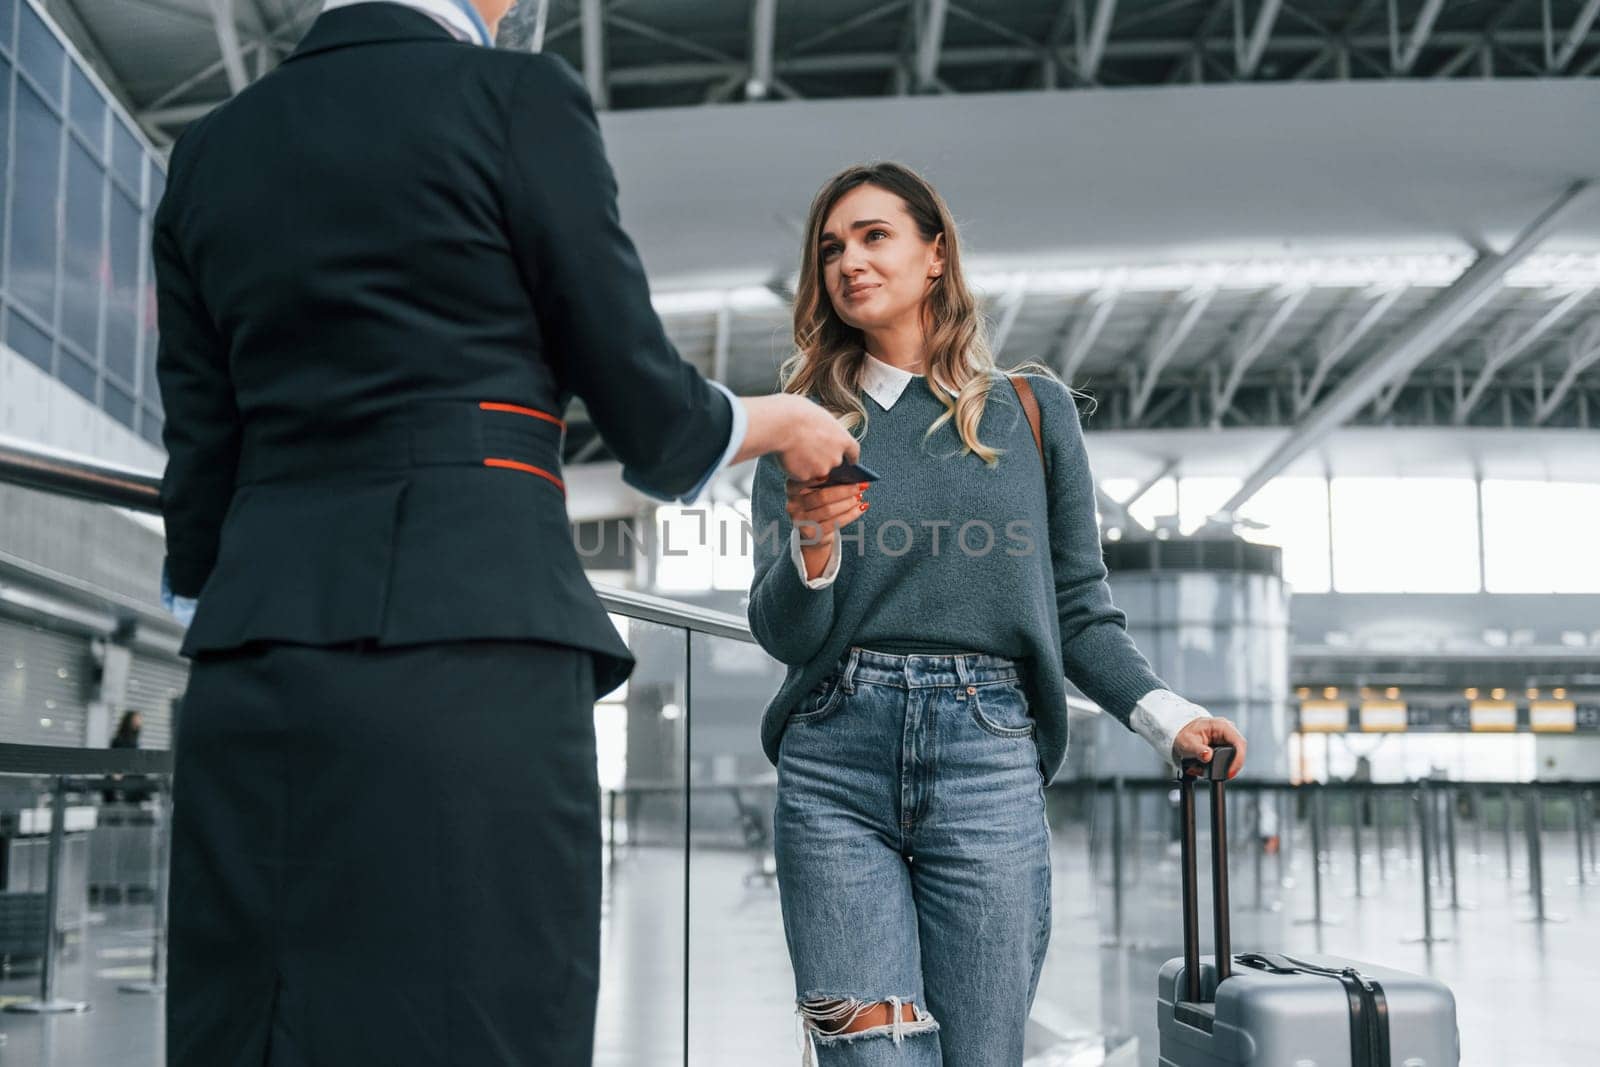 With documents. Young female tourist is in the airport at daytime.